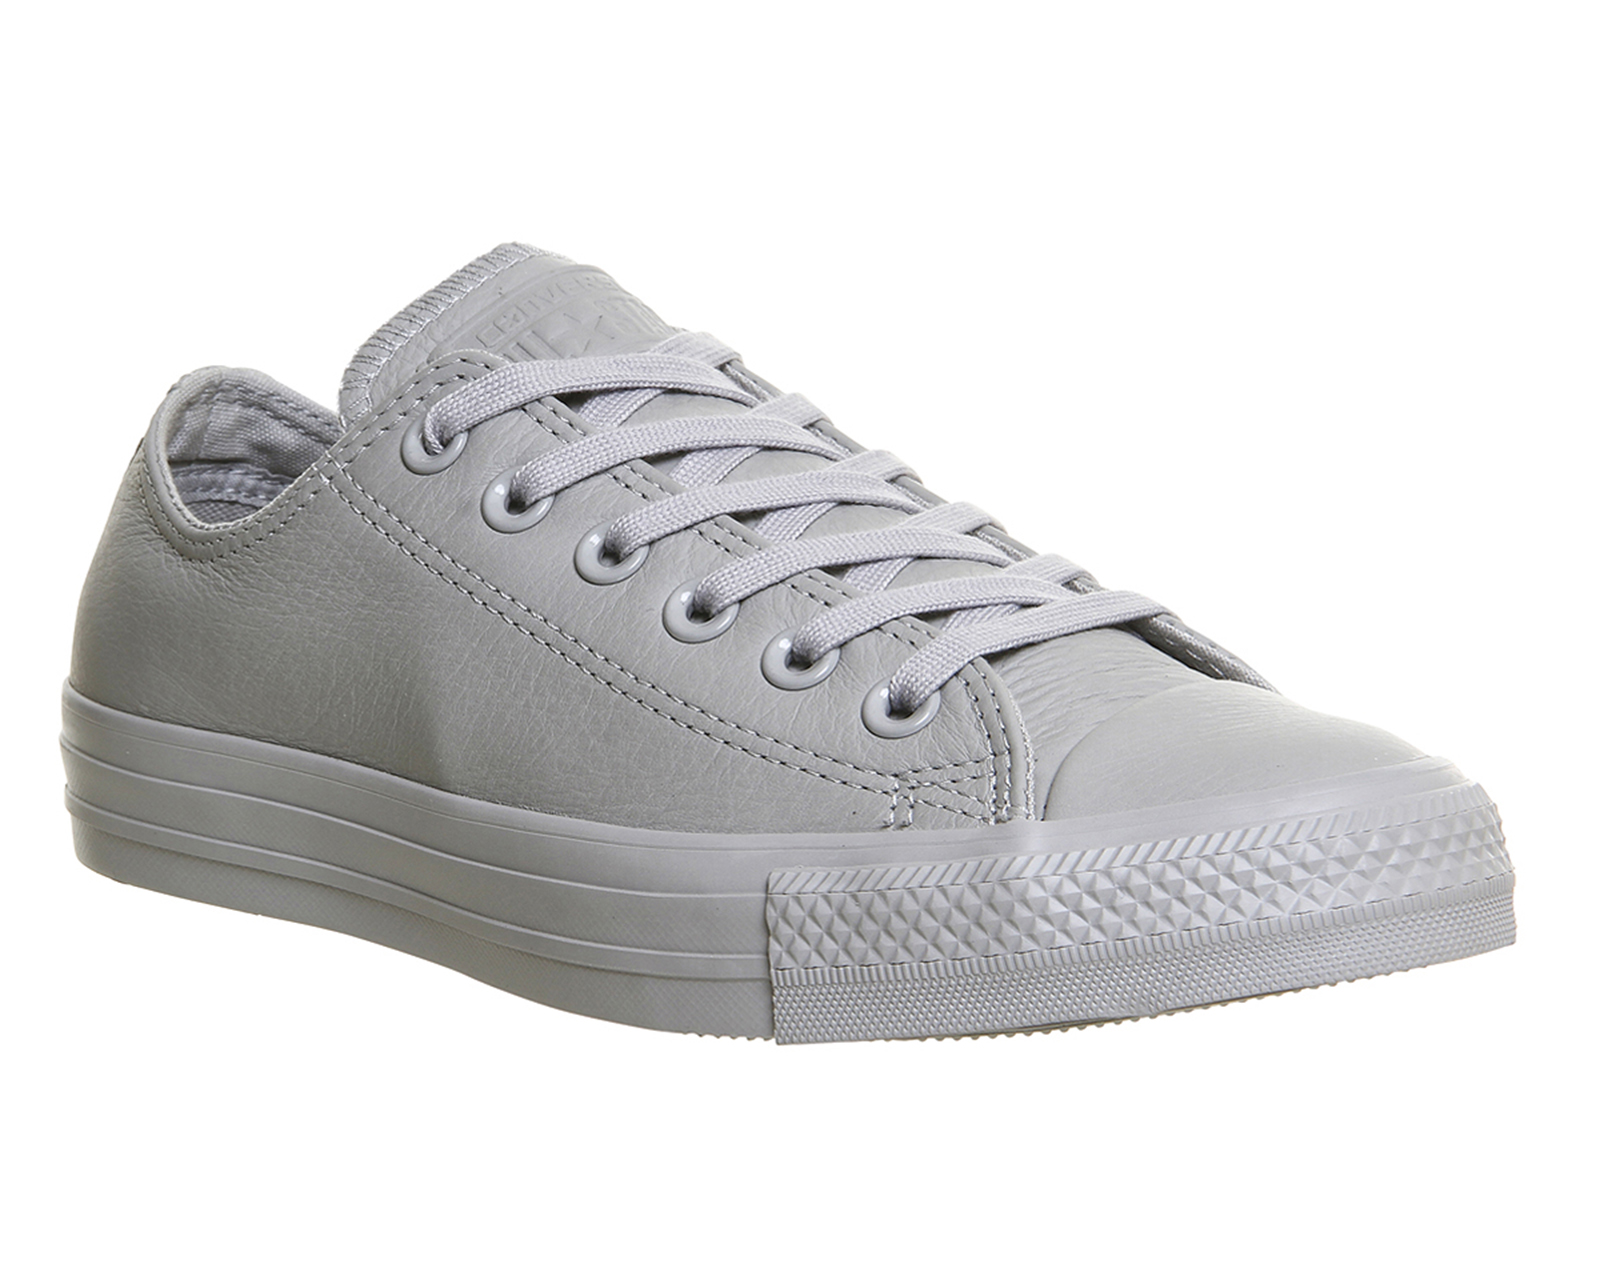 leather converse trainers uk Online 